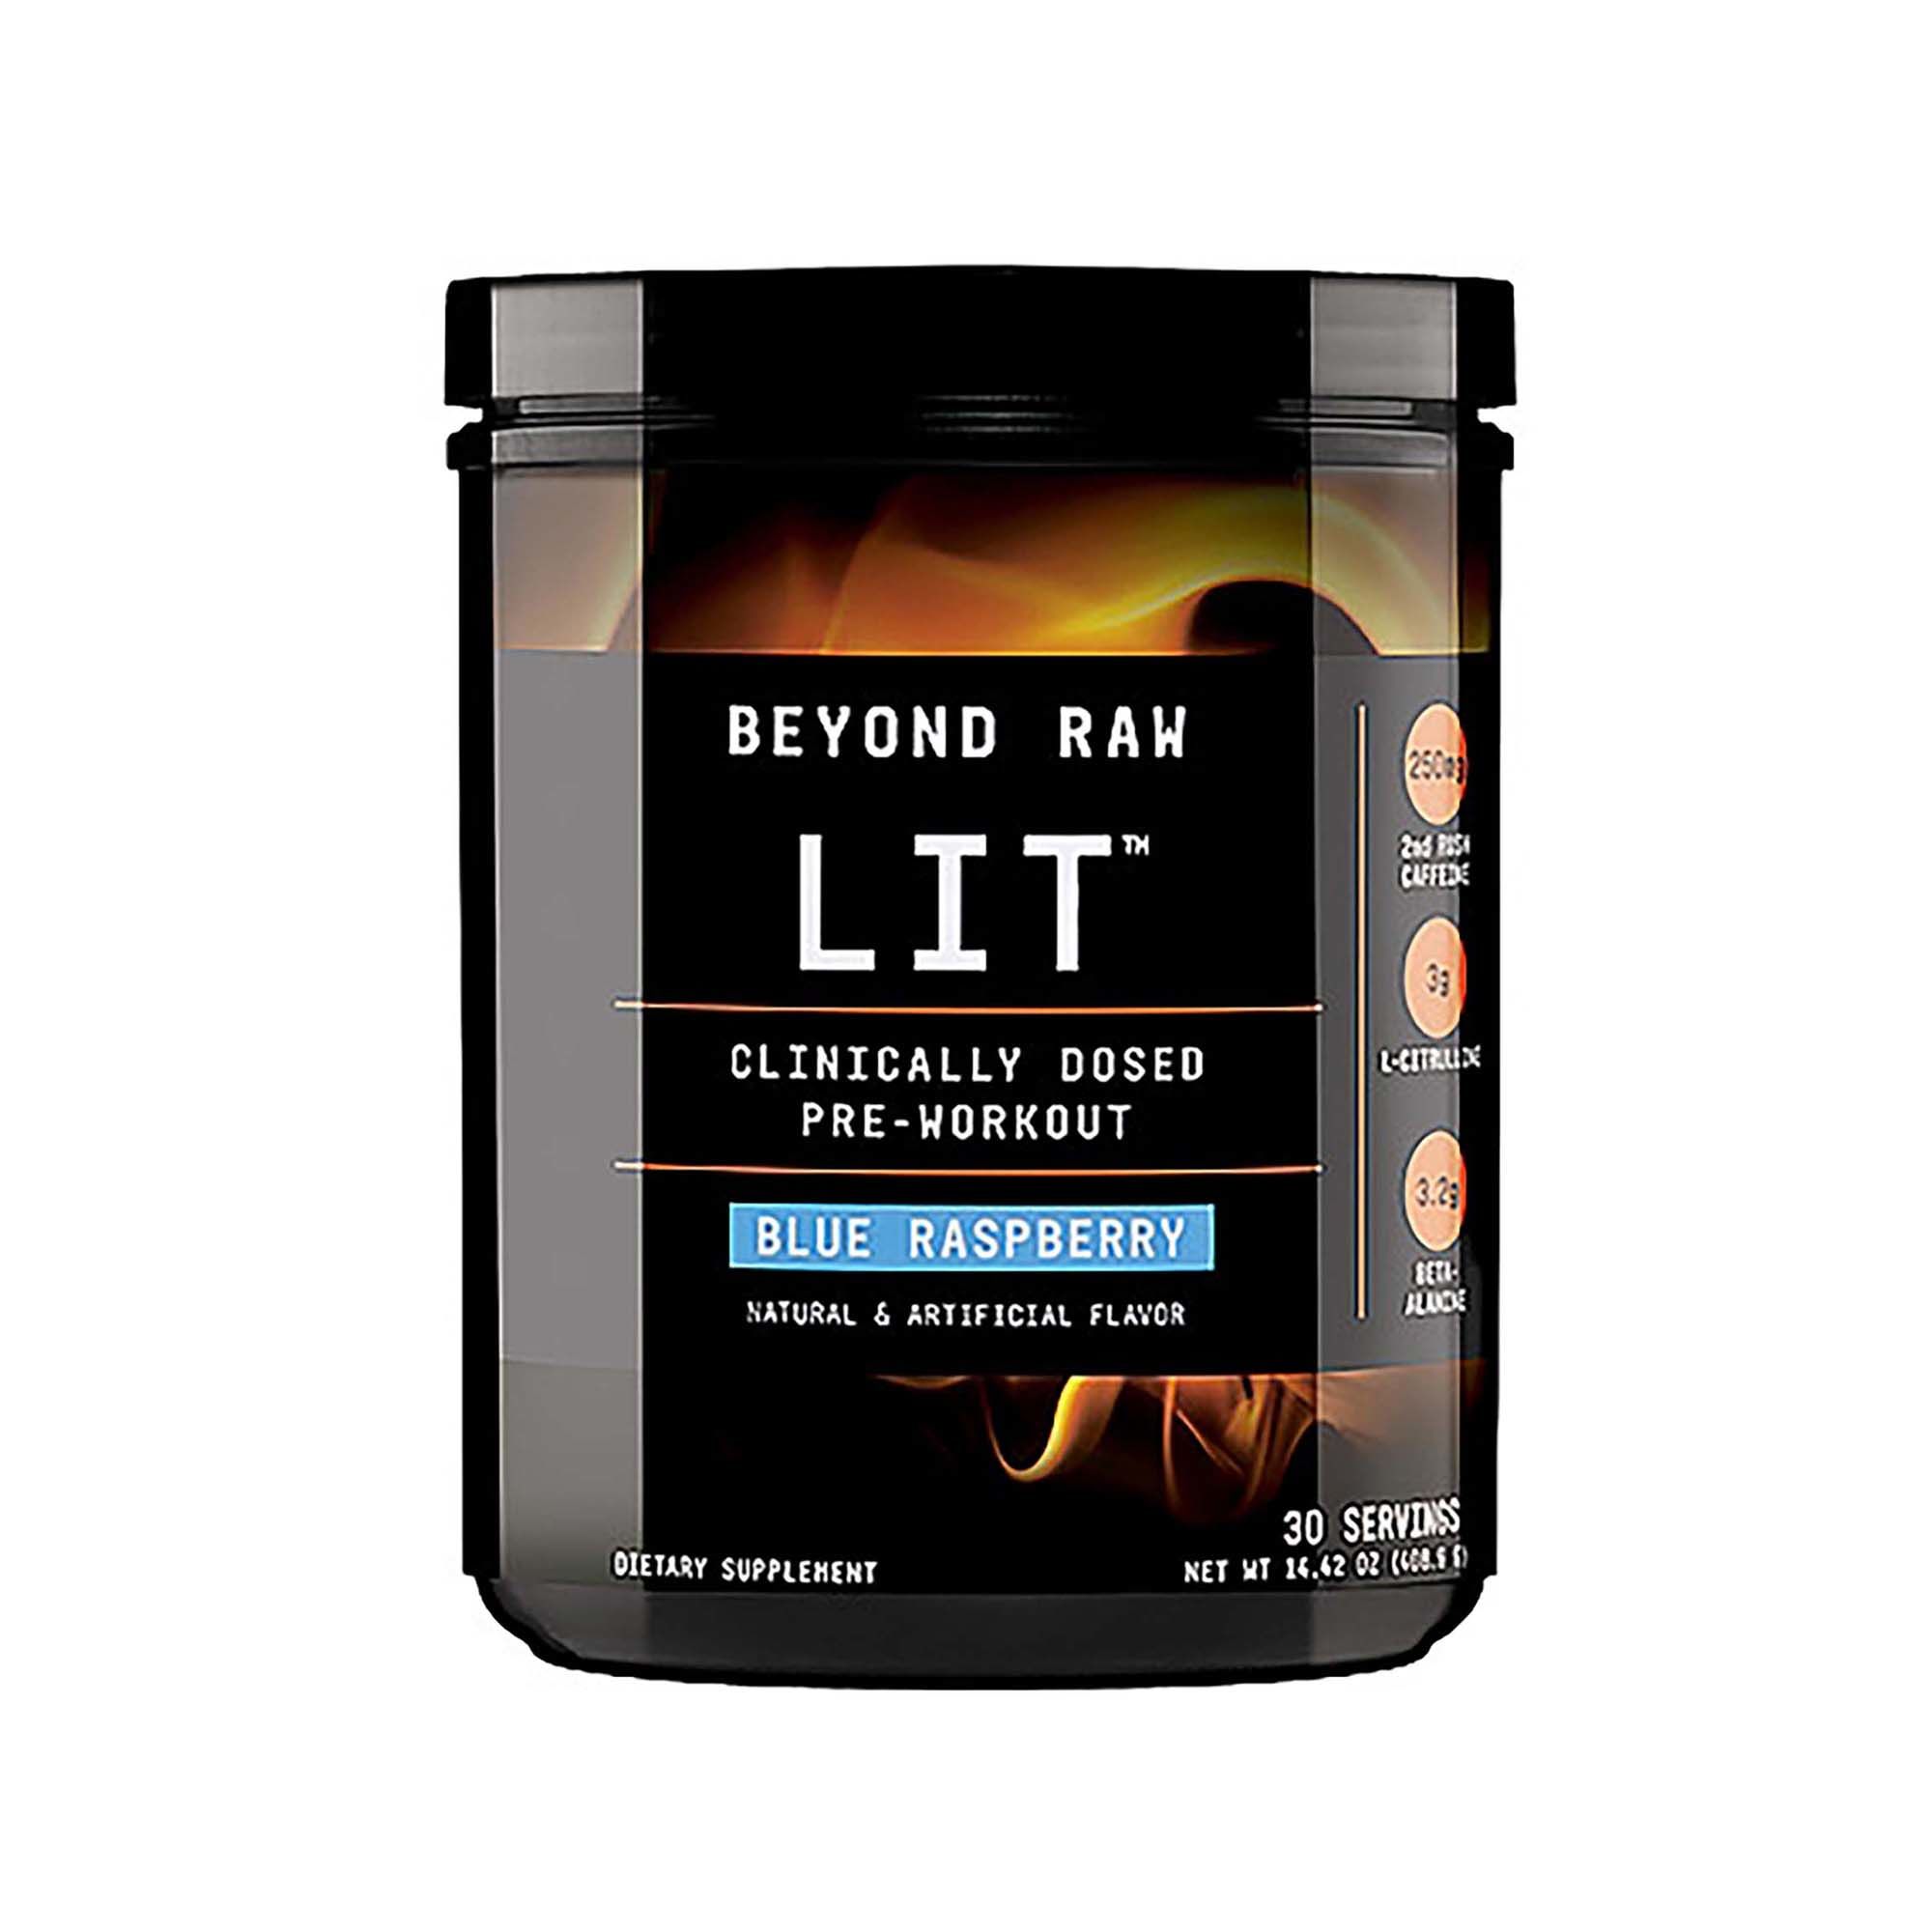 6 Day Beyond raw lit pre workout ingredients for Gym